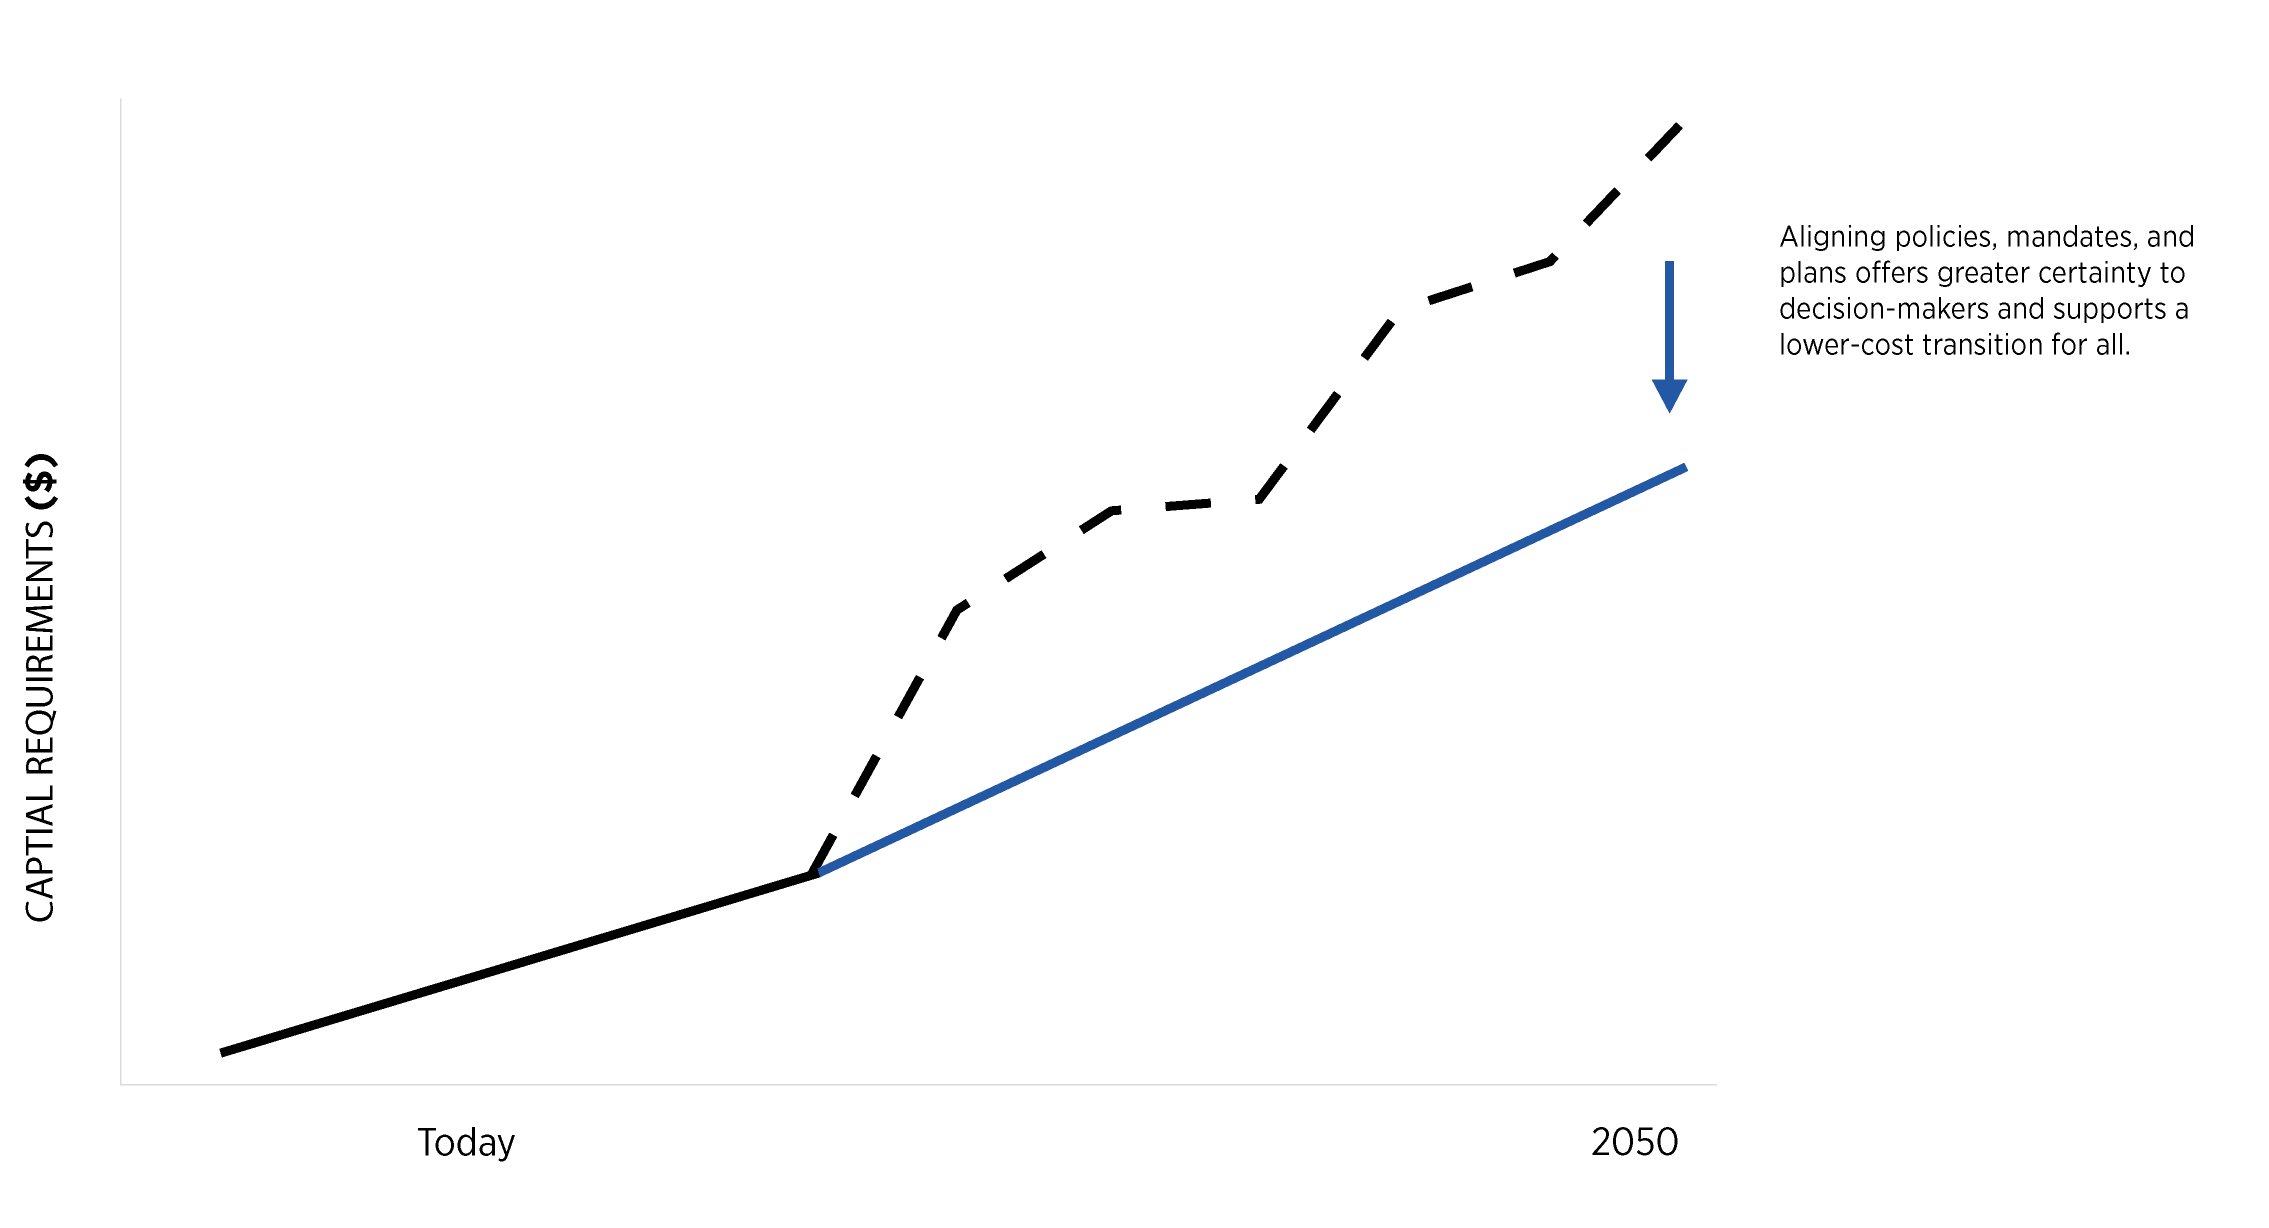 Illustrative line chart with two trajectories for capital requirements